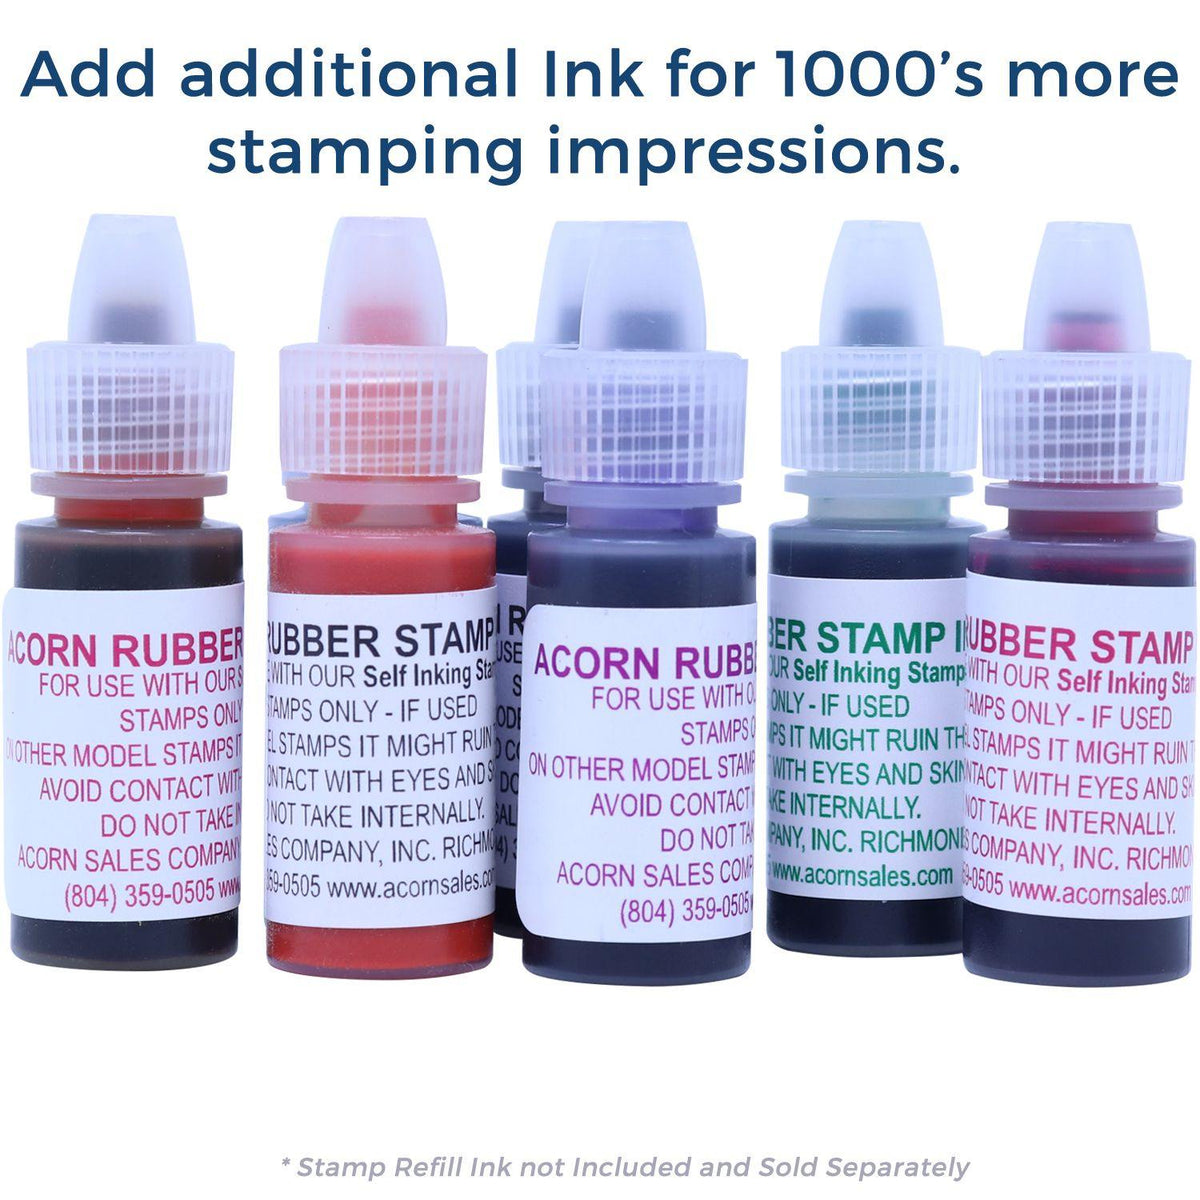 Refill Inks for Large Pre-Inked Narrow Expedite Stamp Available